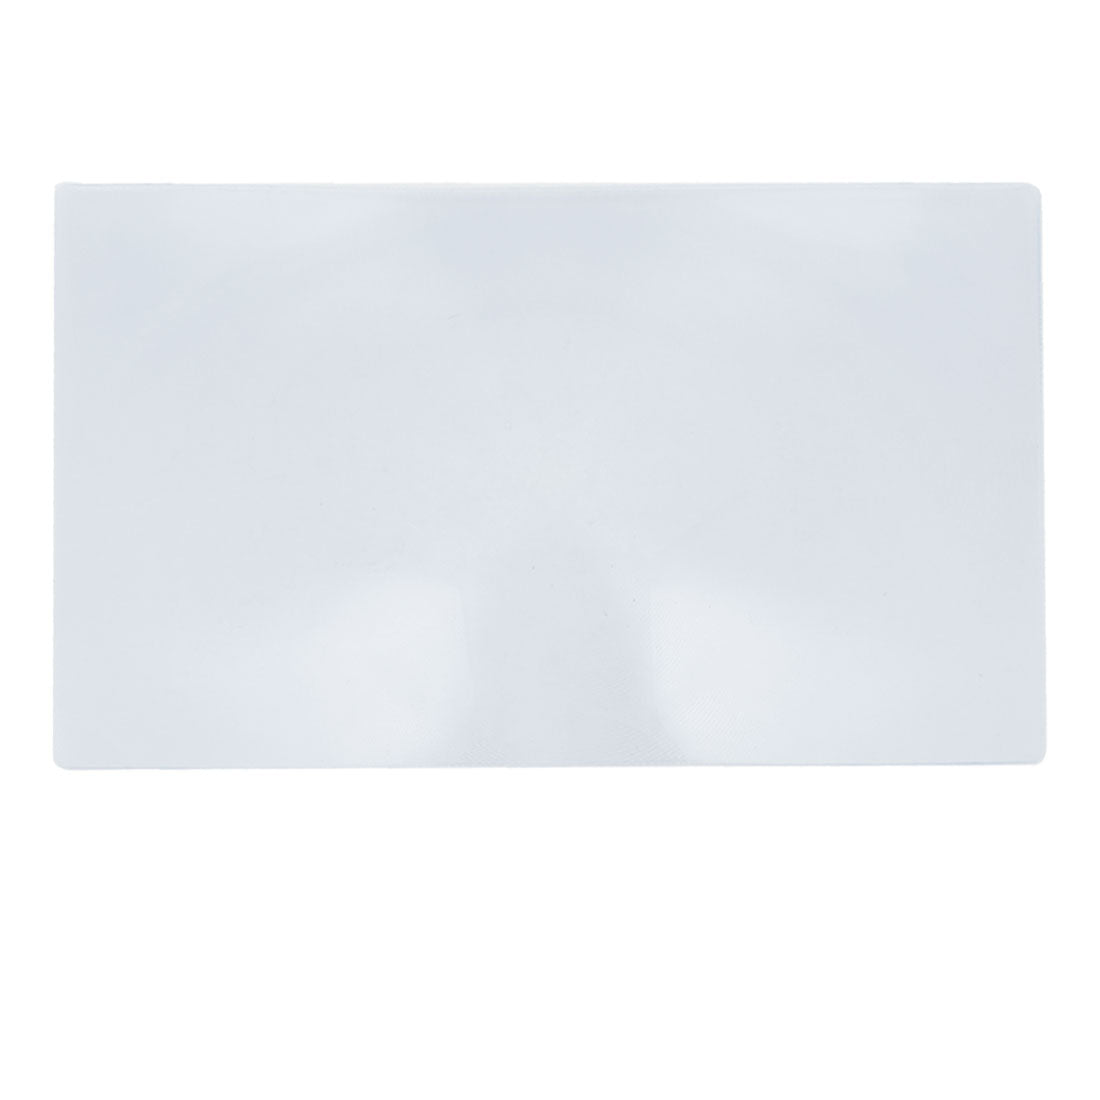 uxcell Uxcell Magnifier Lens Page 3x Magnifying Sheet 260x180x0.5mm